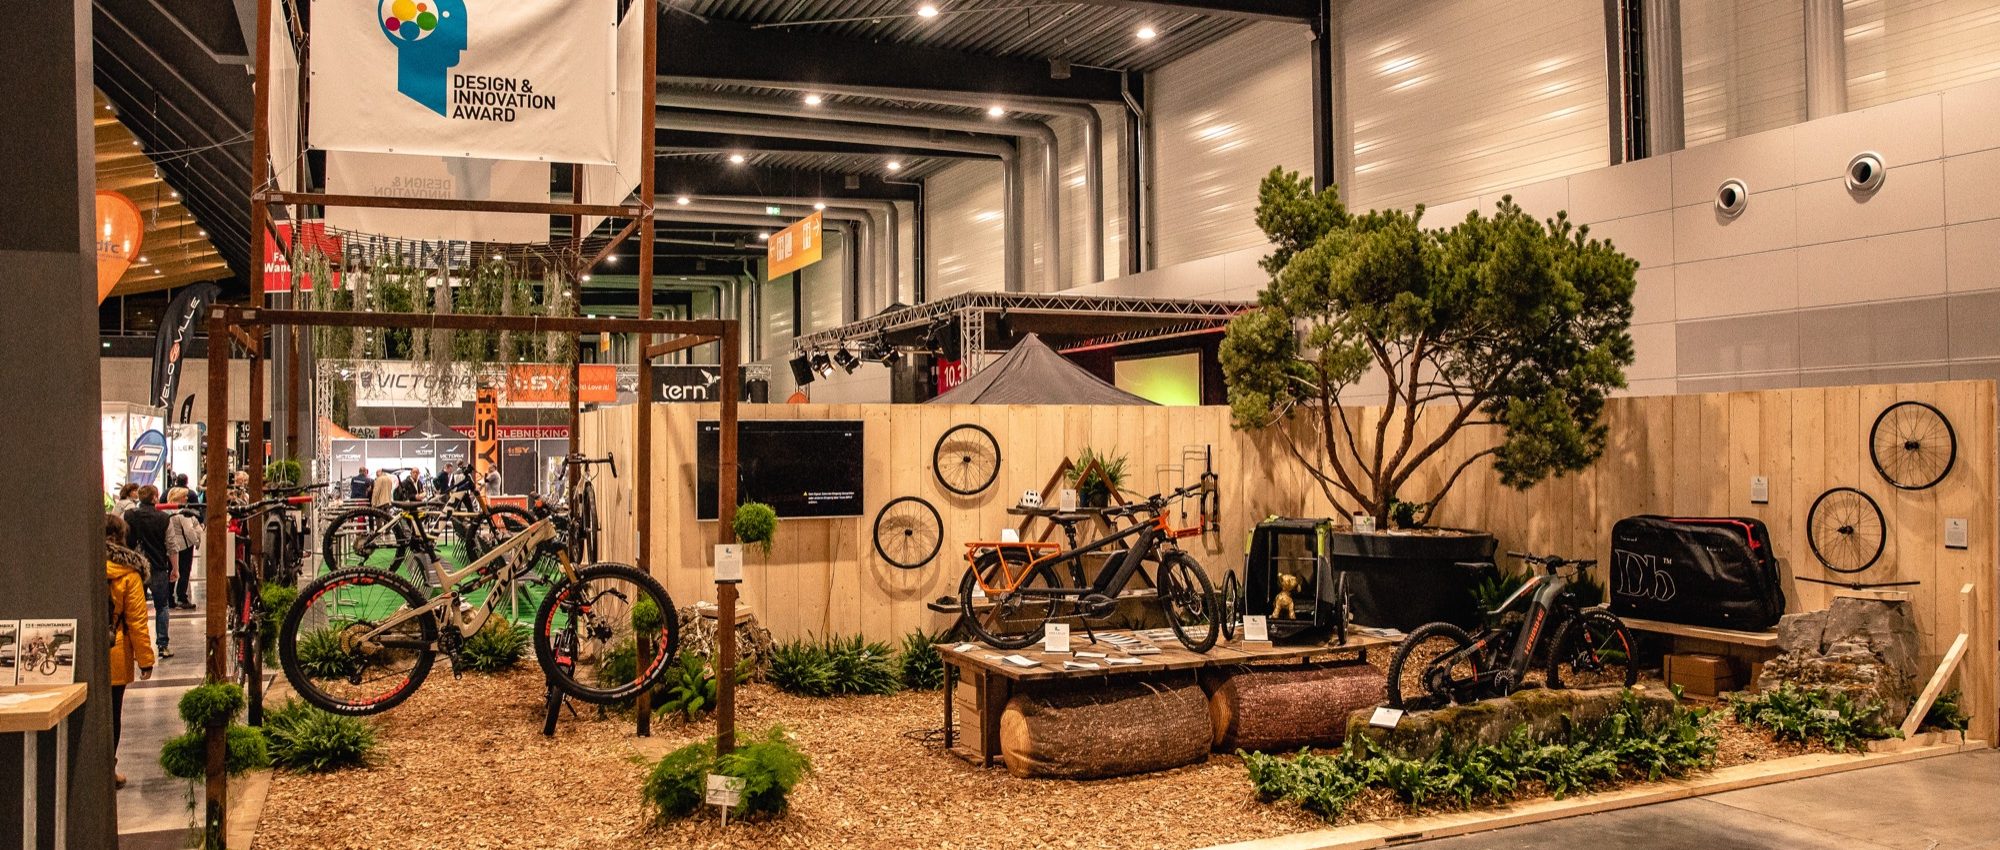 1. Introduction to Bike Shows: Celebrating Innovation and Design